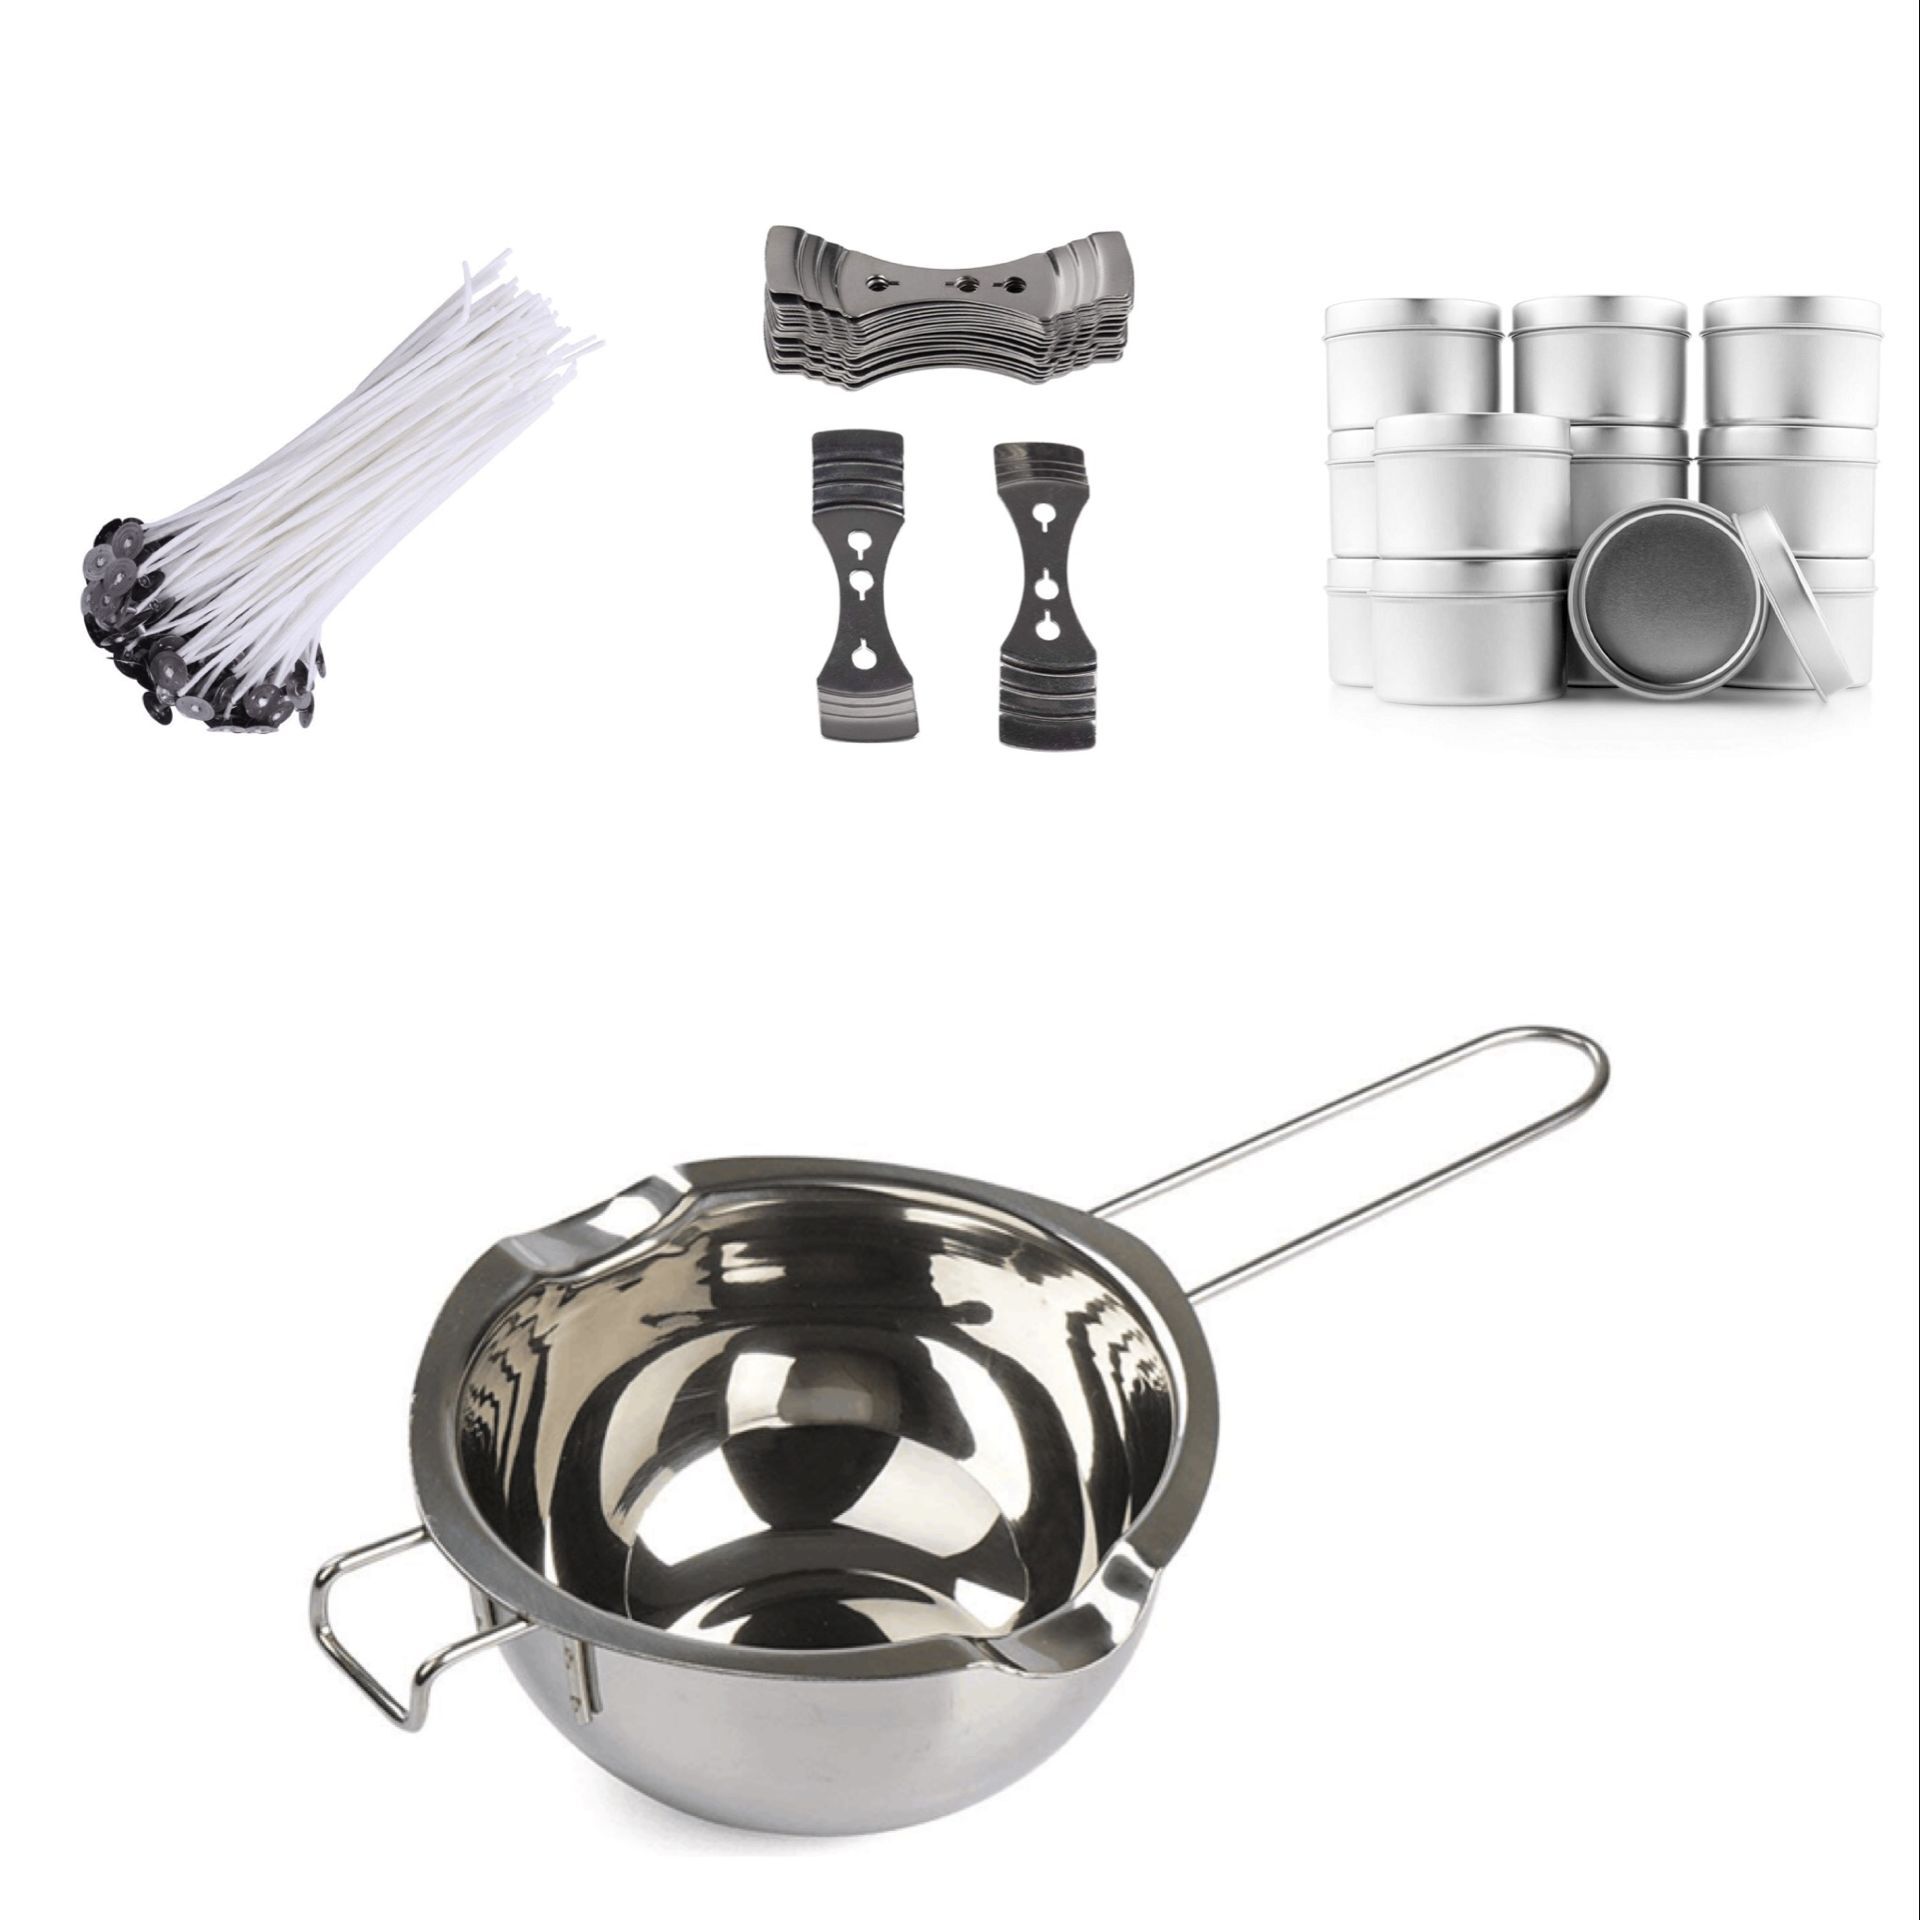 Wholesale Candle Making Kit Includes Candle Wick / Wick Centering Device / 4OZ Metal Tin / Pitcher